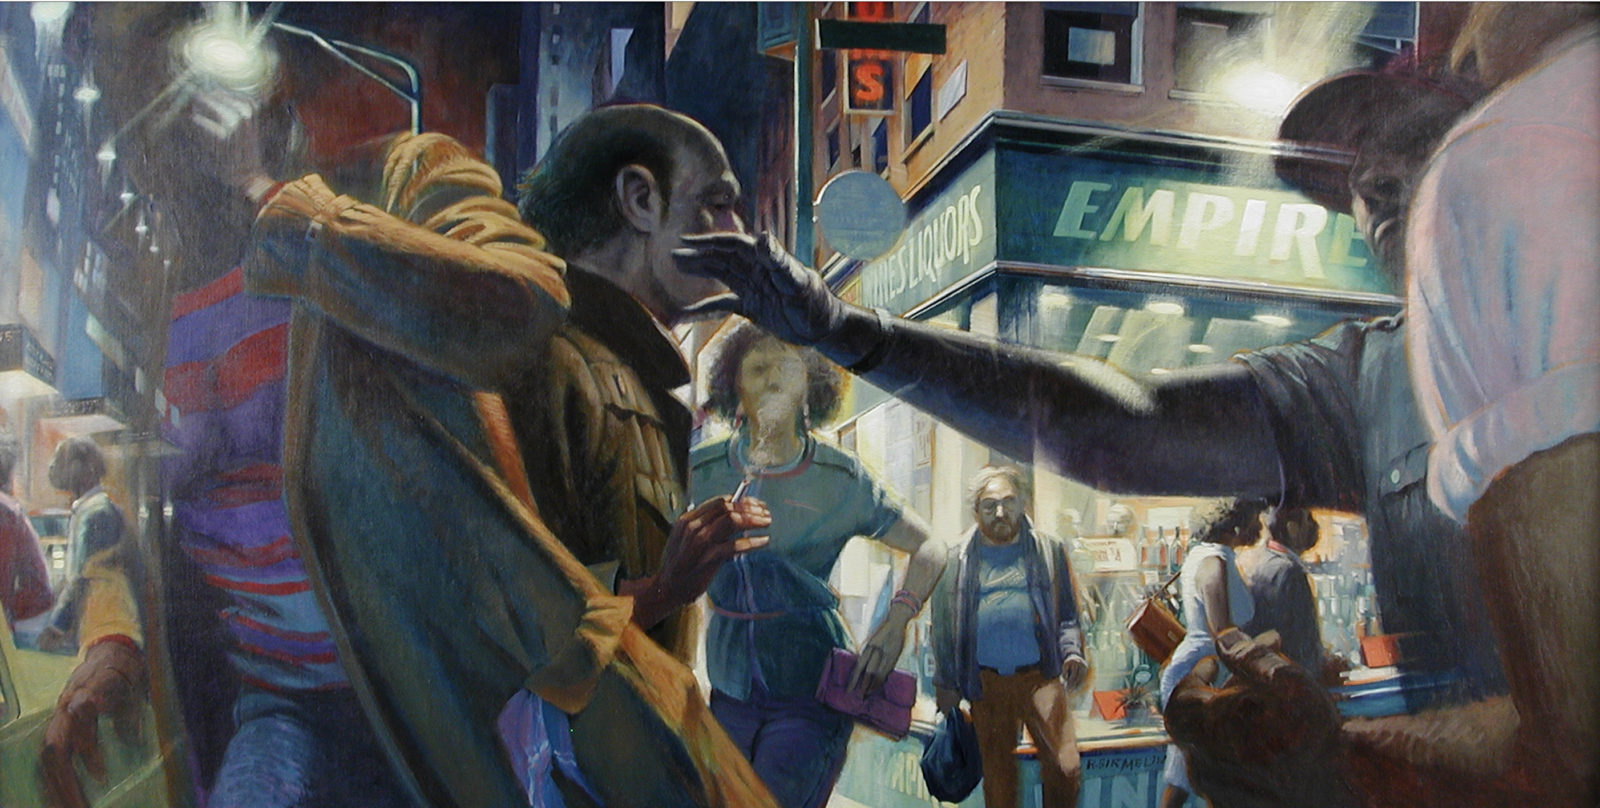 A cityscape with a sense of urgency and aggression. A figure in the left foreground, whose face is effaced, appears to be fleeing as another man from the right foreground reaches out toward him. There are several figures in the painting, all of which are shown only partially--their arms, hands, profiles, torsos. While the figures in the foreground seem embroiled in the central action, other figures are mere observers or passersby.